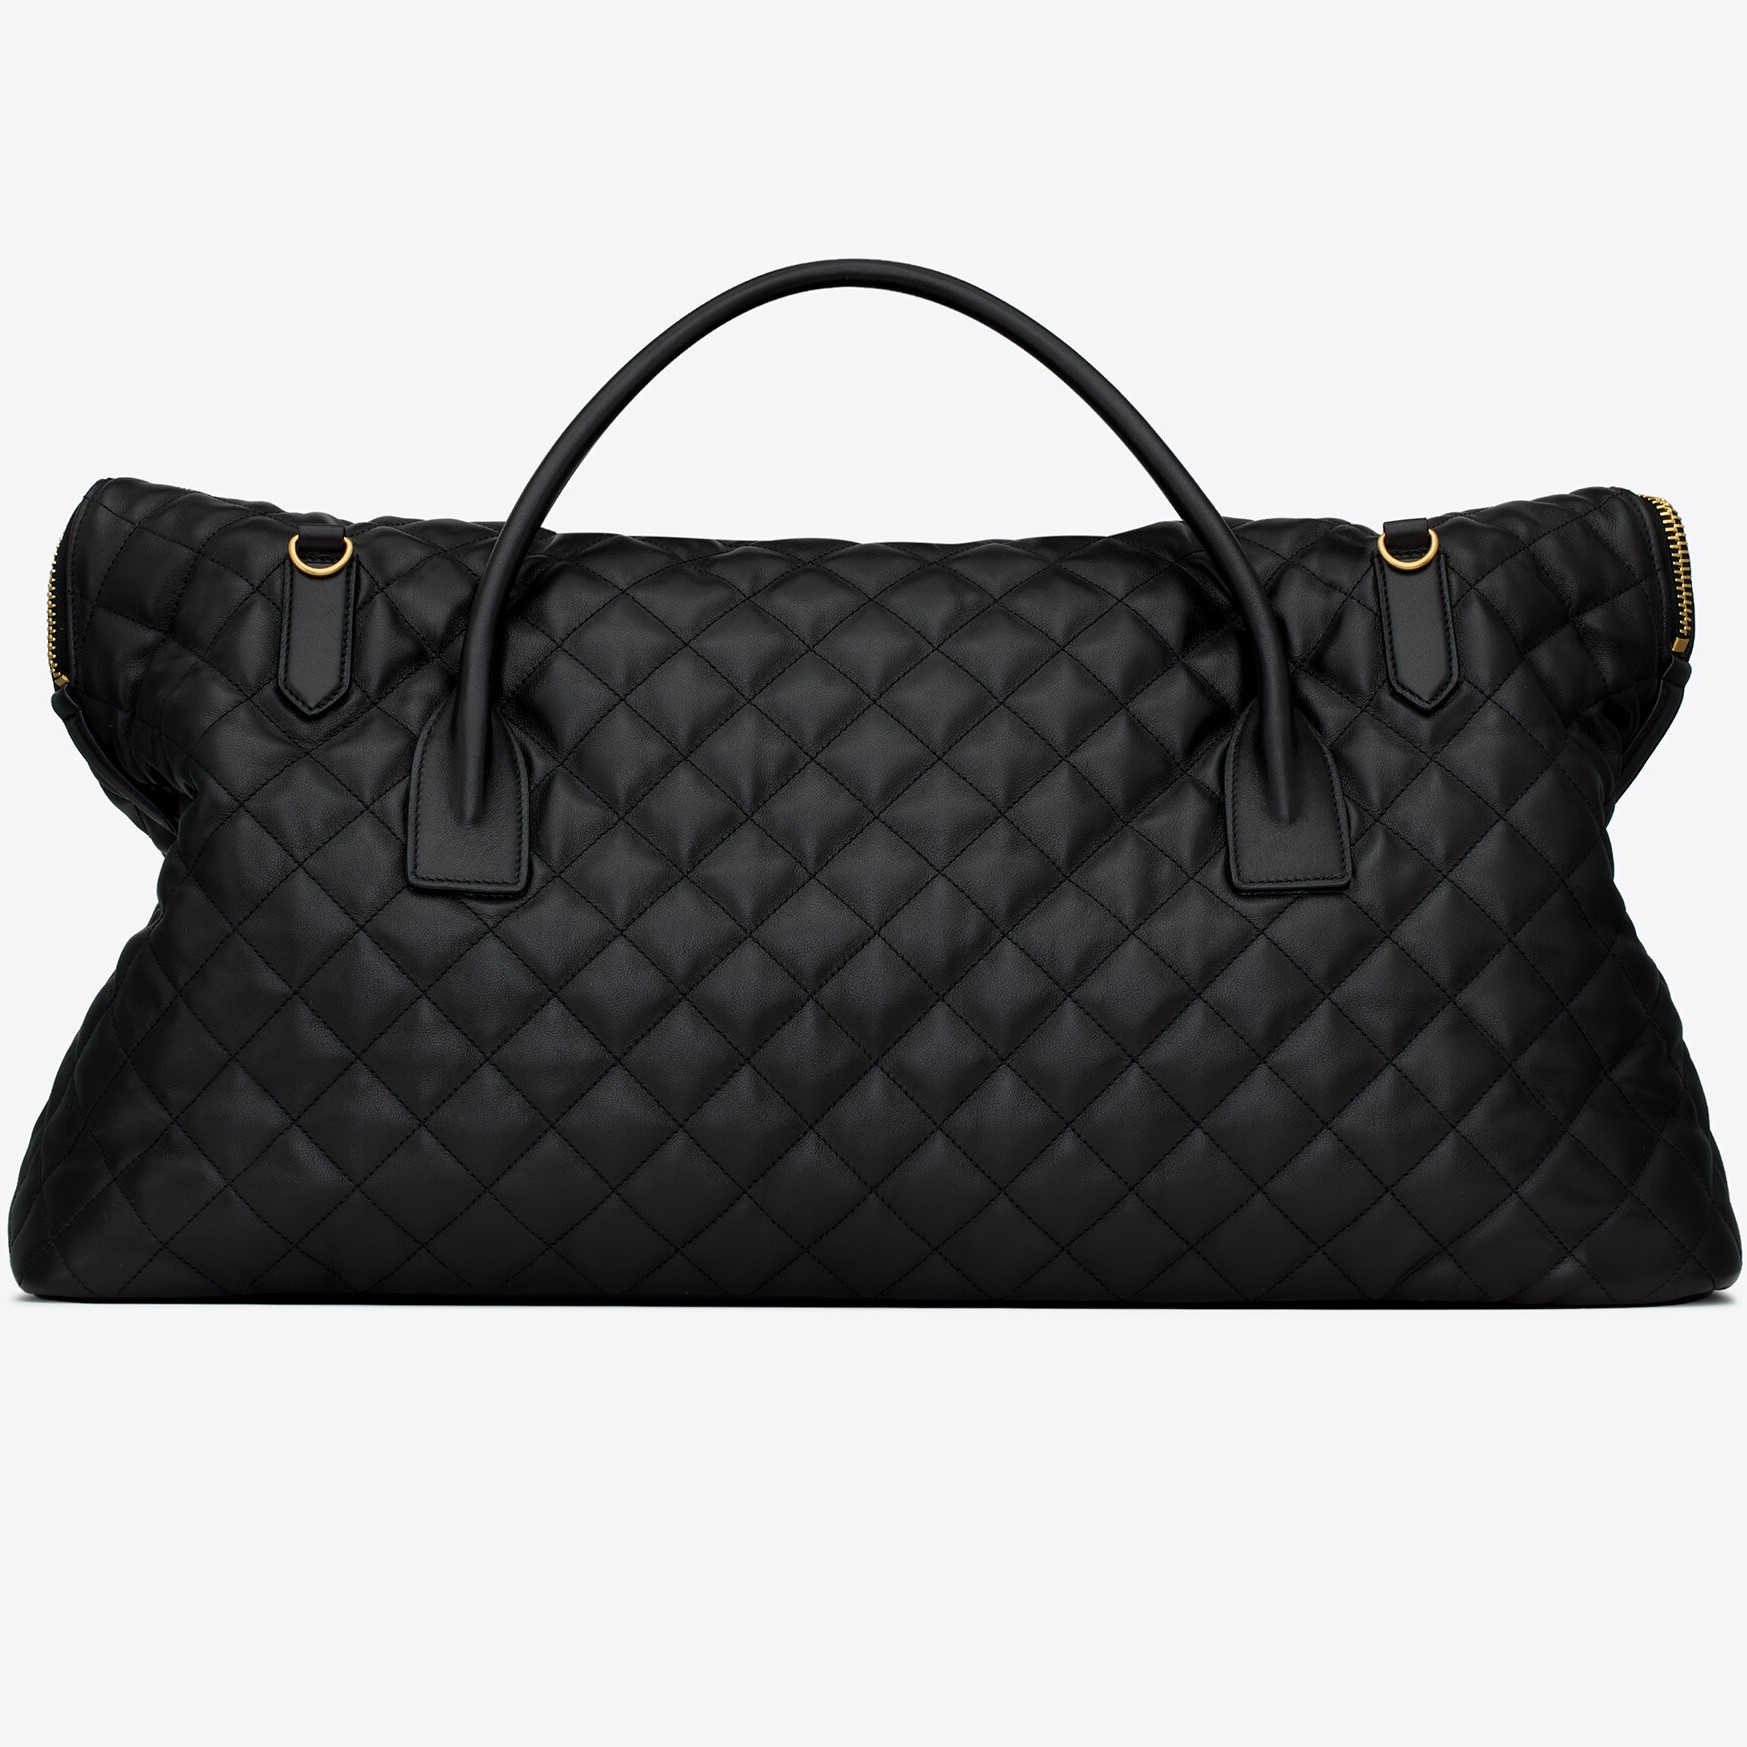 TÚI DU LỊCH YSL ES GIANT TRAVEL BAG IN QUILTED LEATHER 5